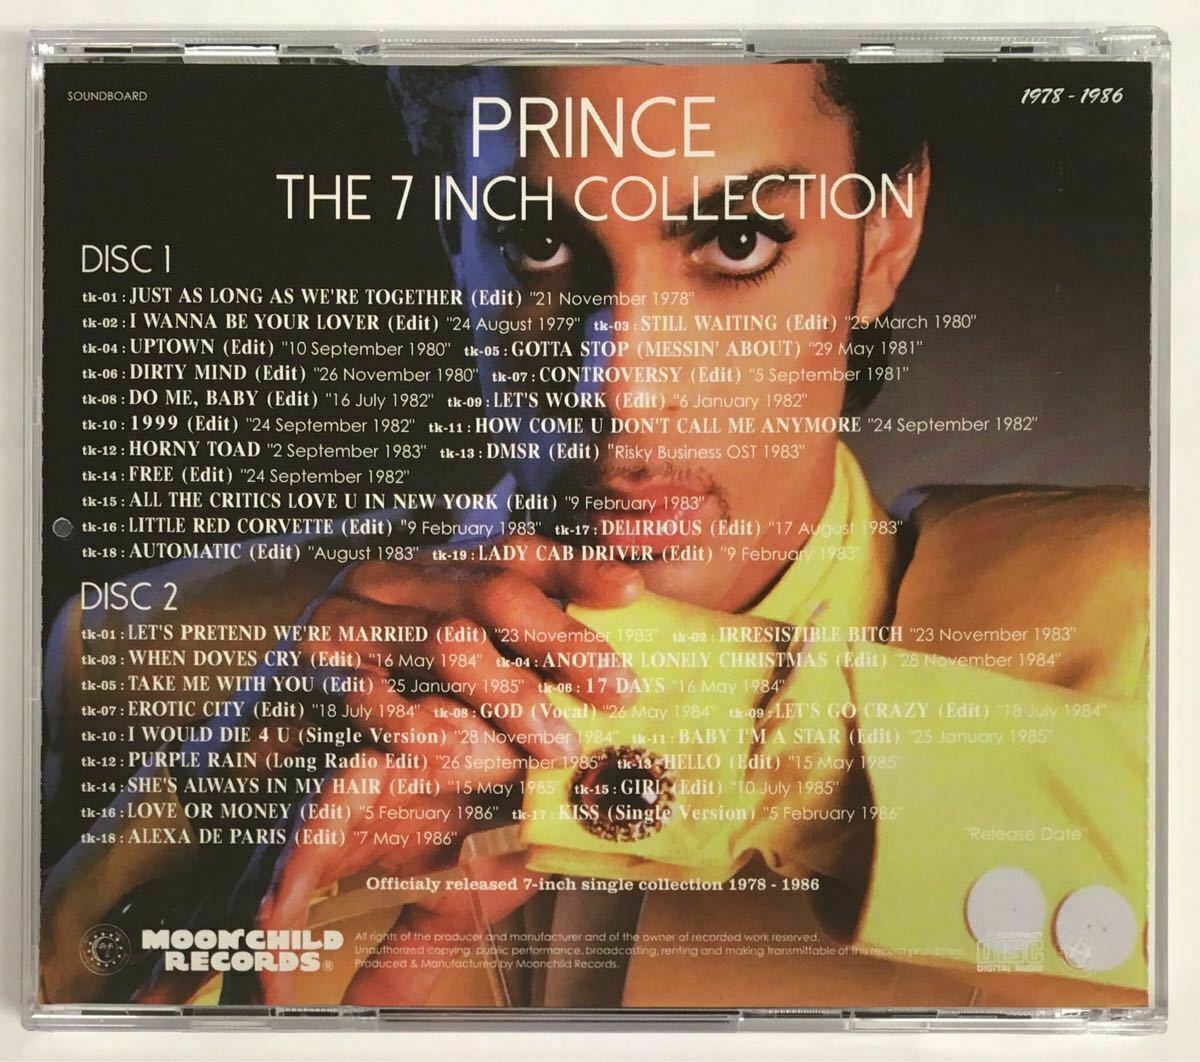 Prince The 7 inch Collection 1978-1986 CD 2 Discs Moonchild